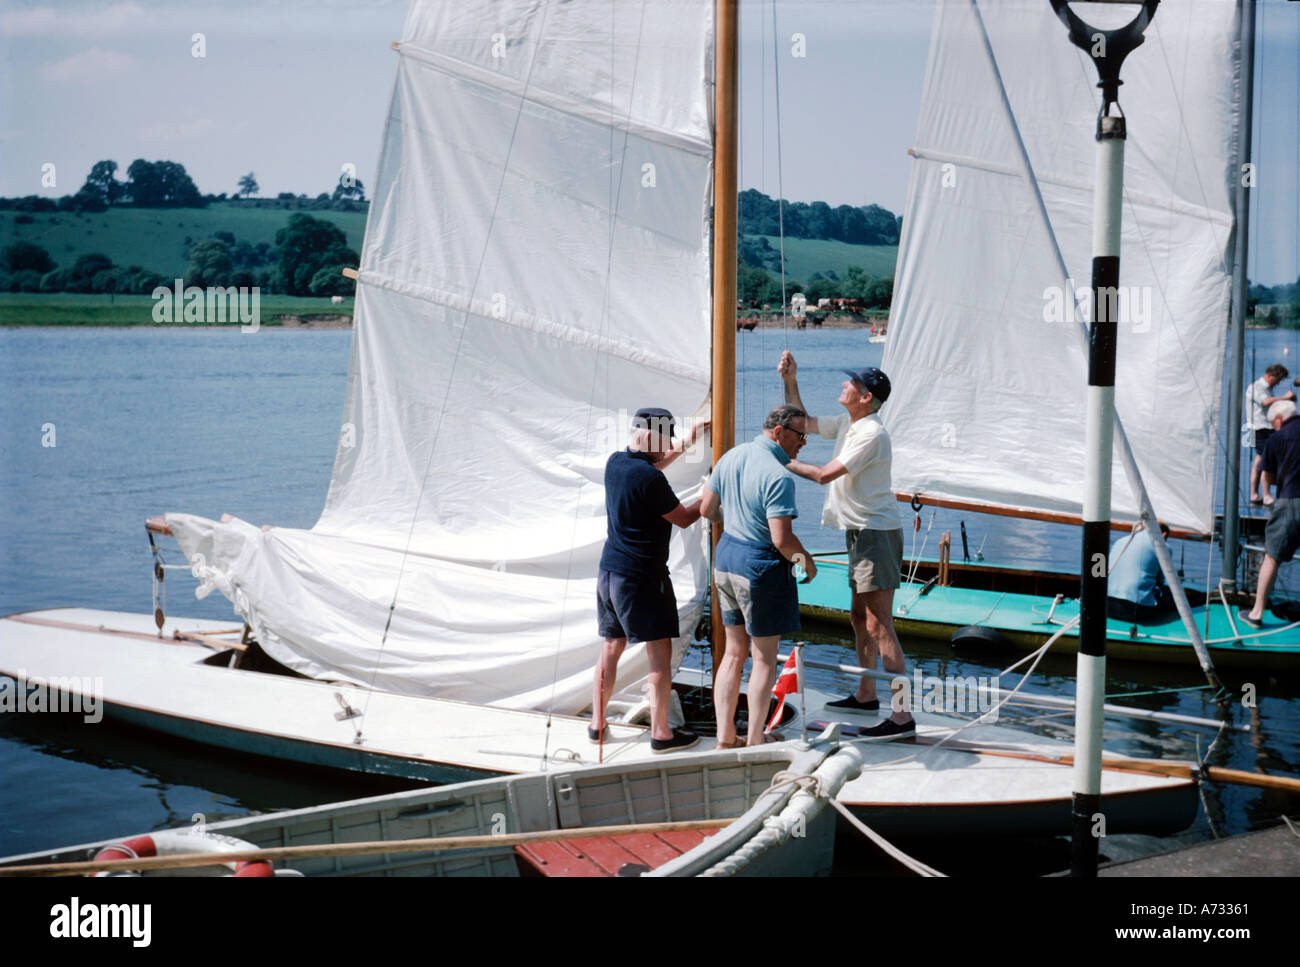 Thames Rater class racing boat being prepared for racing Upper Thames Sailing Club Summer 1968 Stock Photo